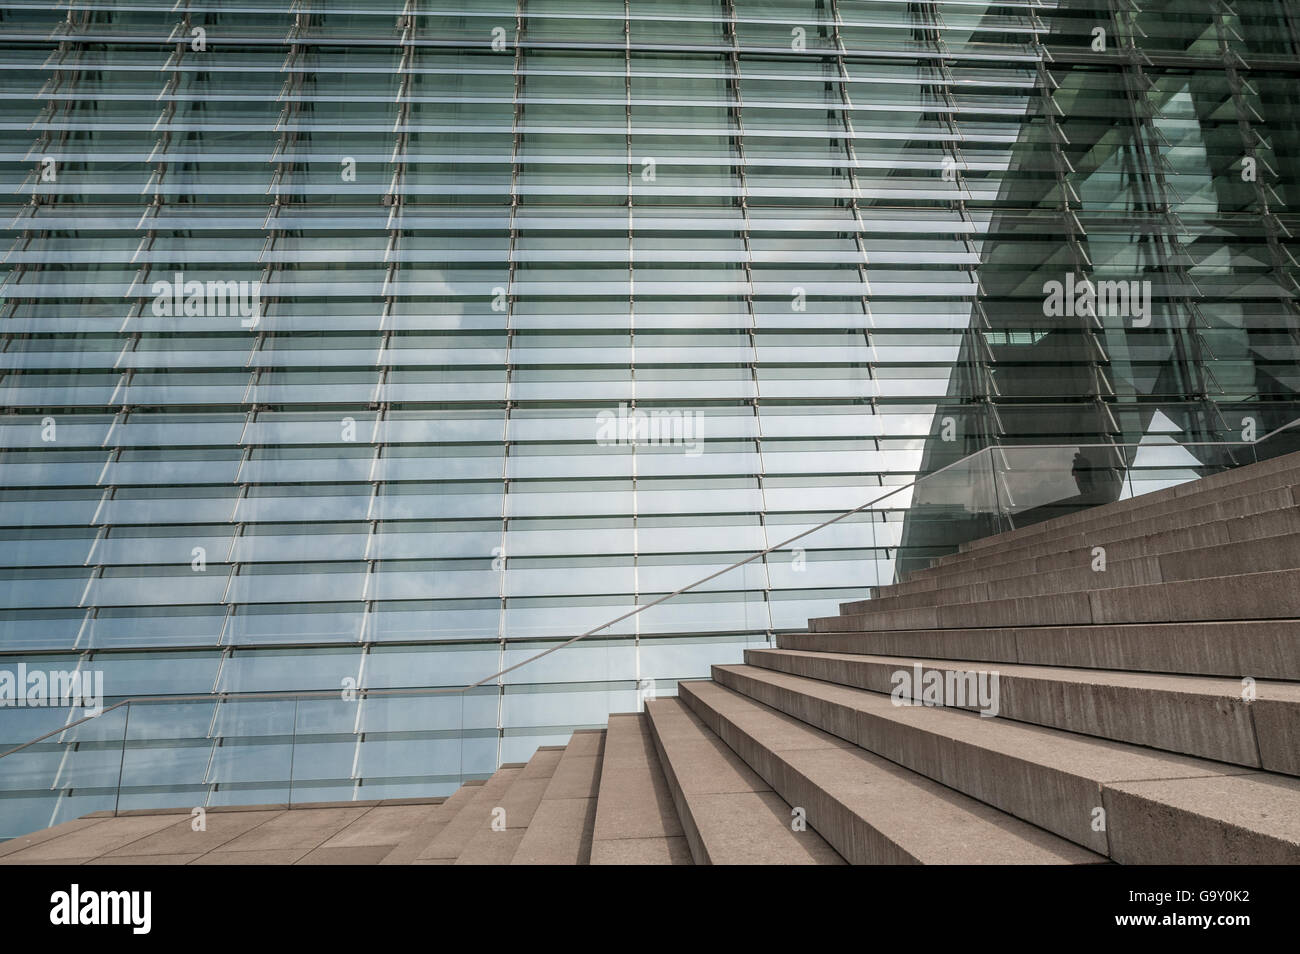 Stairway of Marie-Elisabeth-Lueders-Haus in the government district of Berlin, Germany. Stock Photo